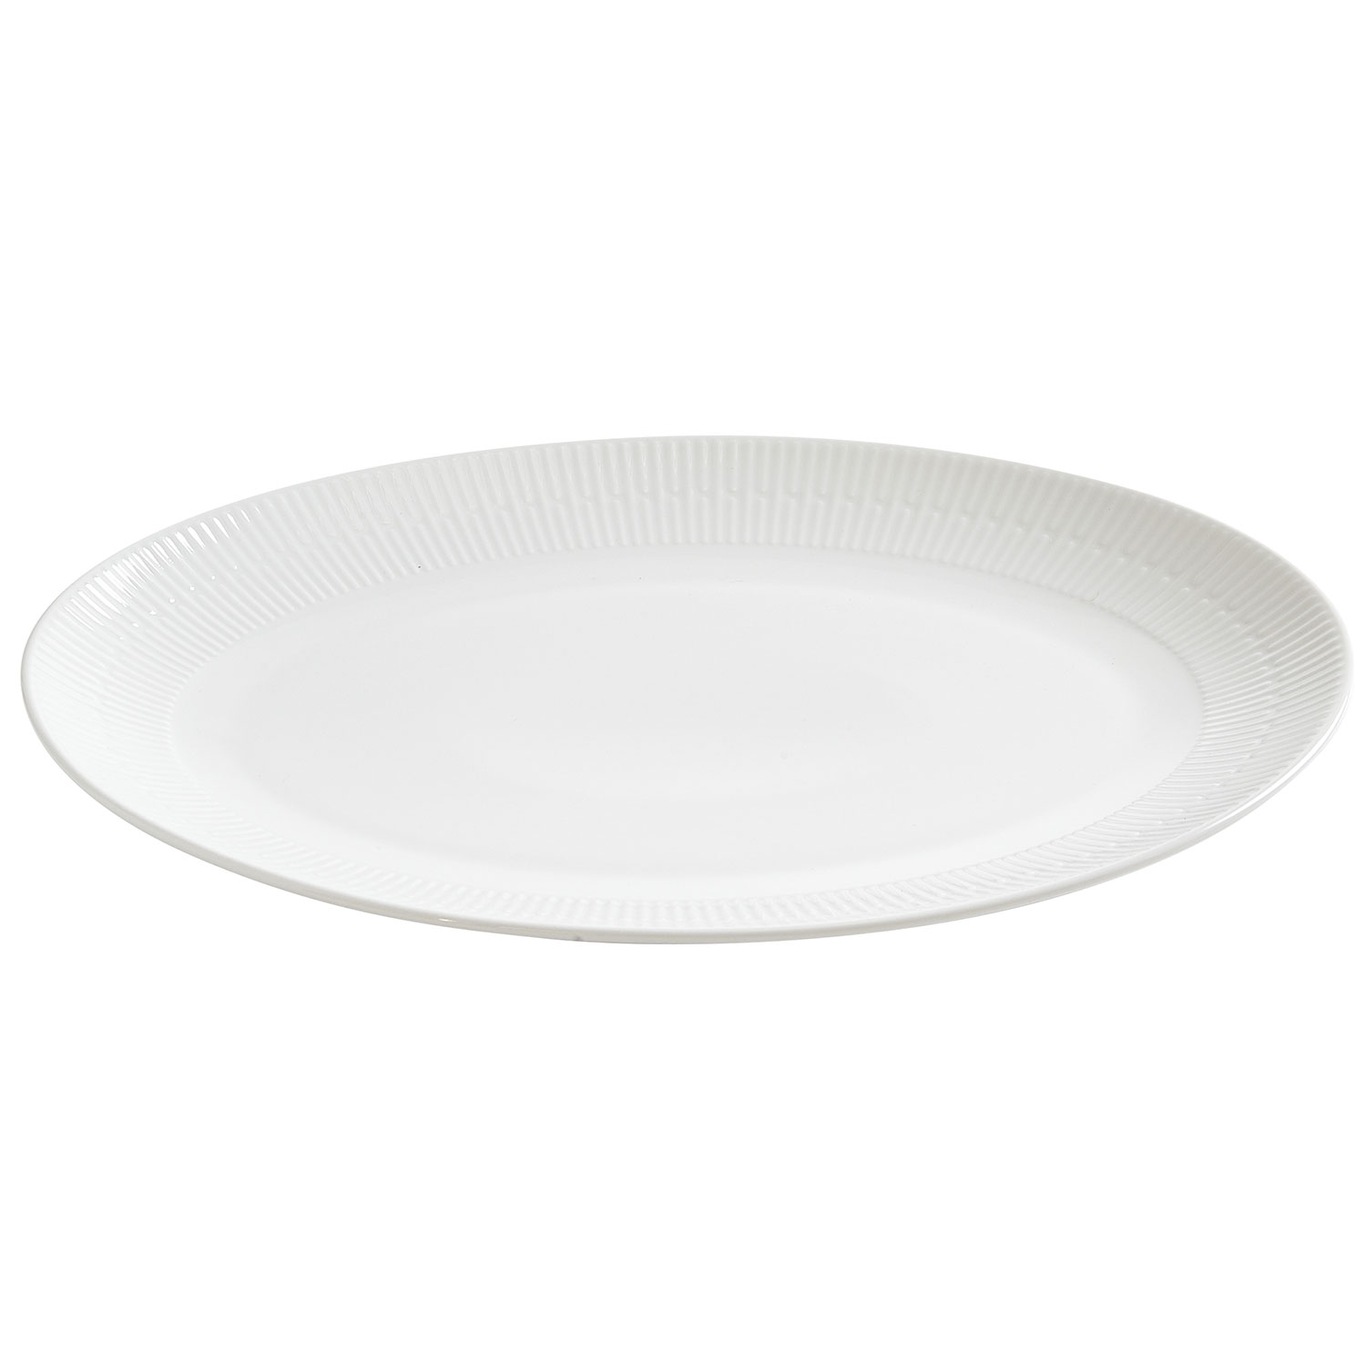 Relief Dish Oval 40x31 cm